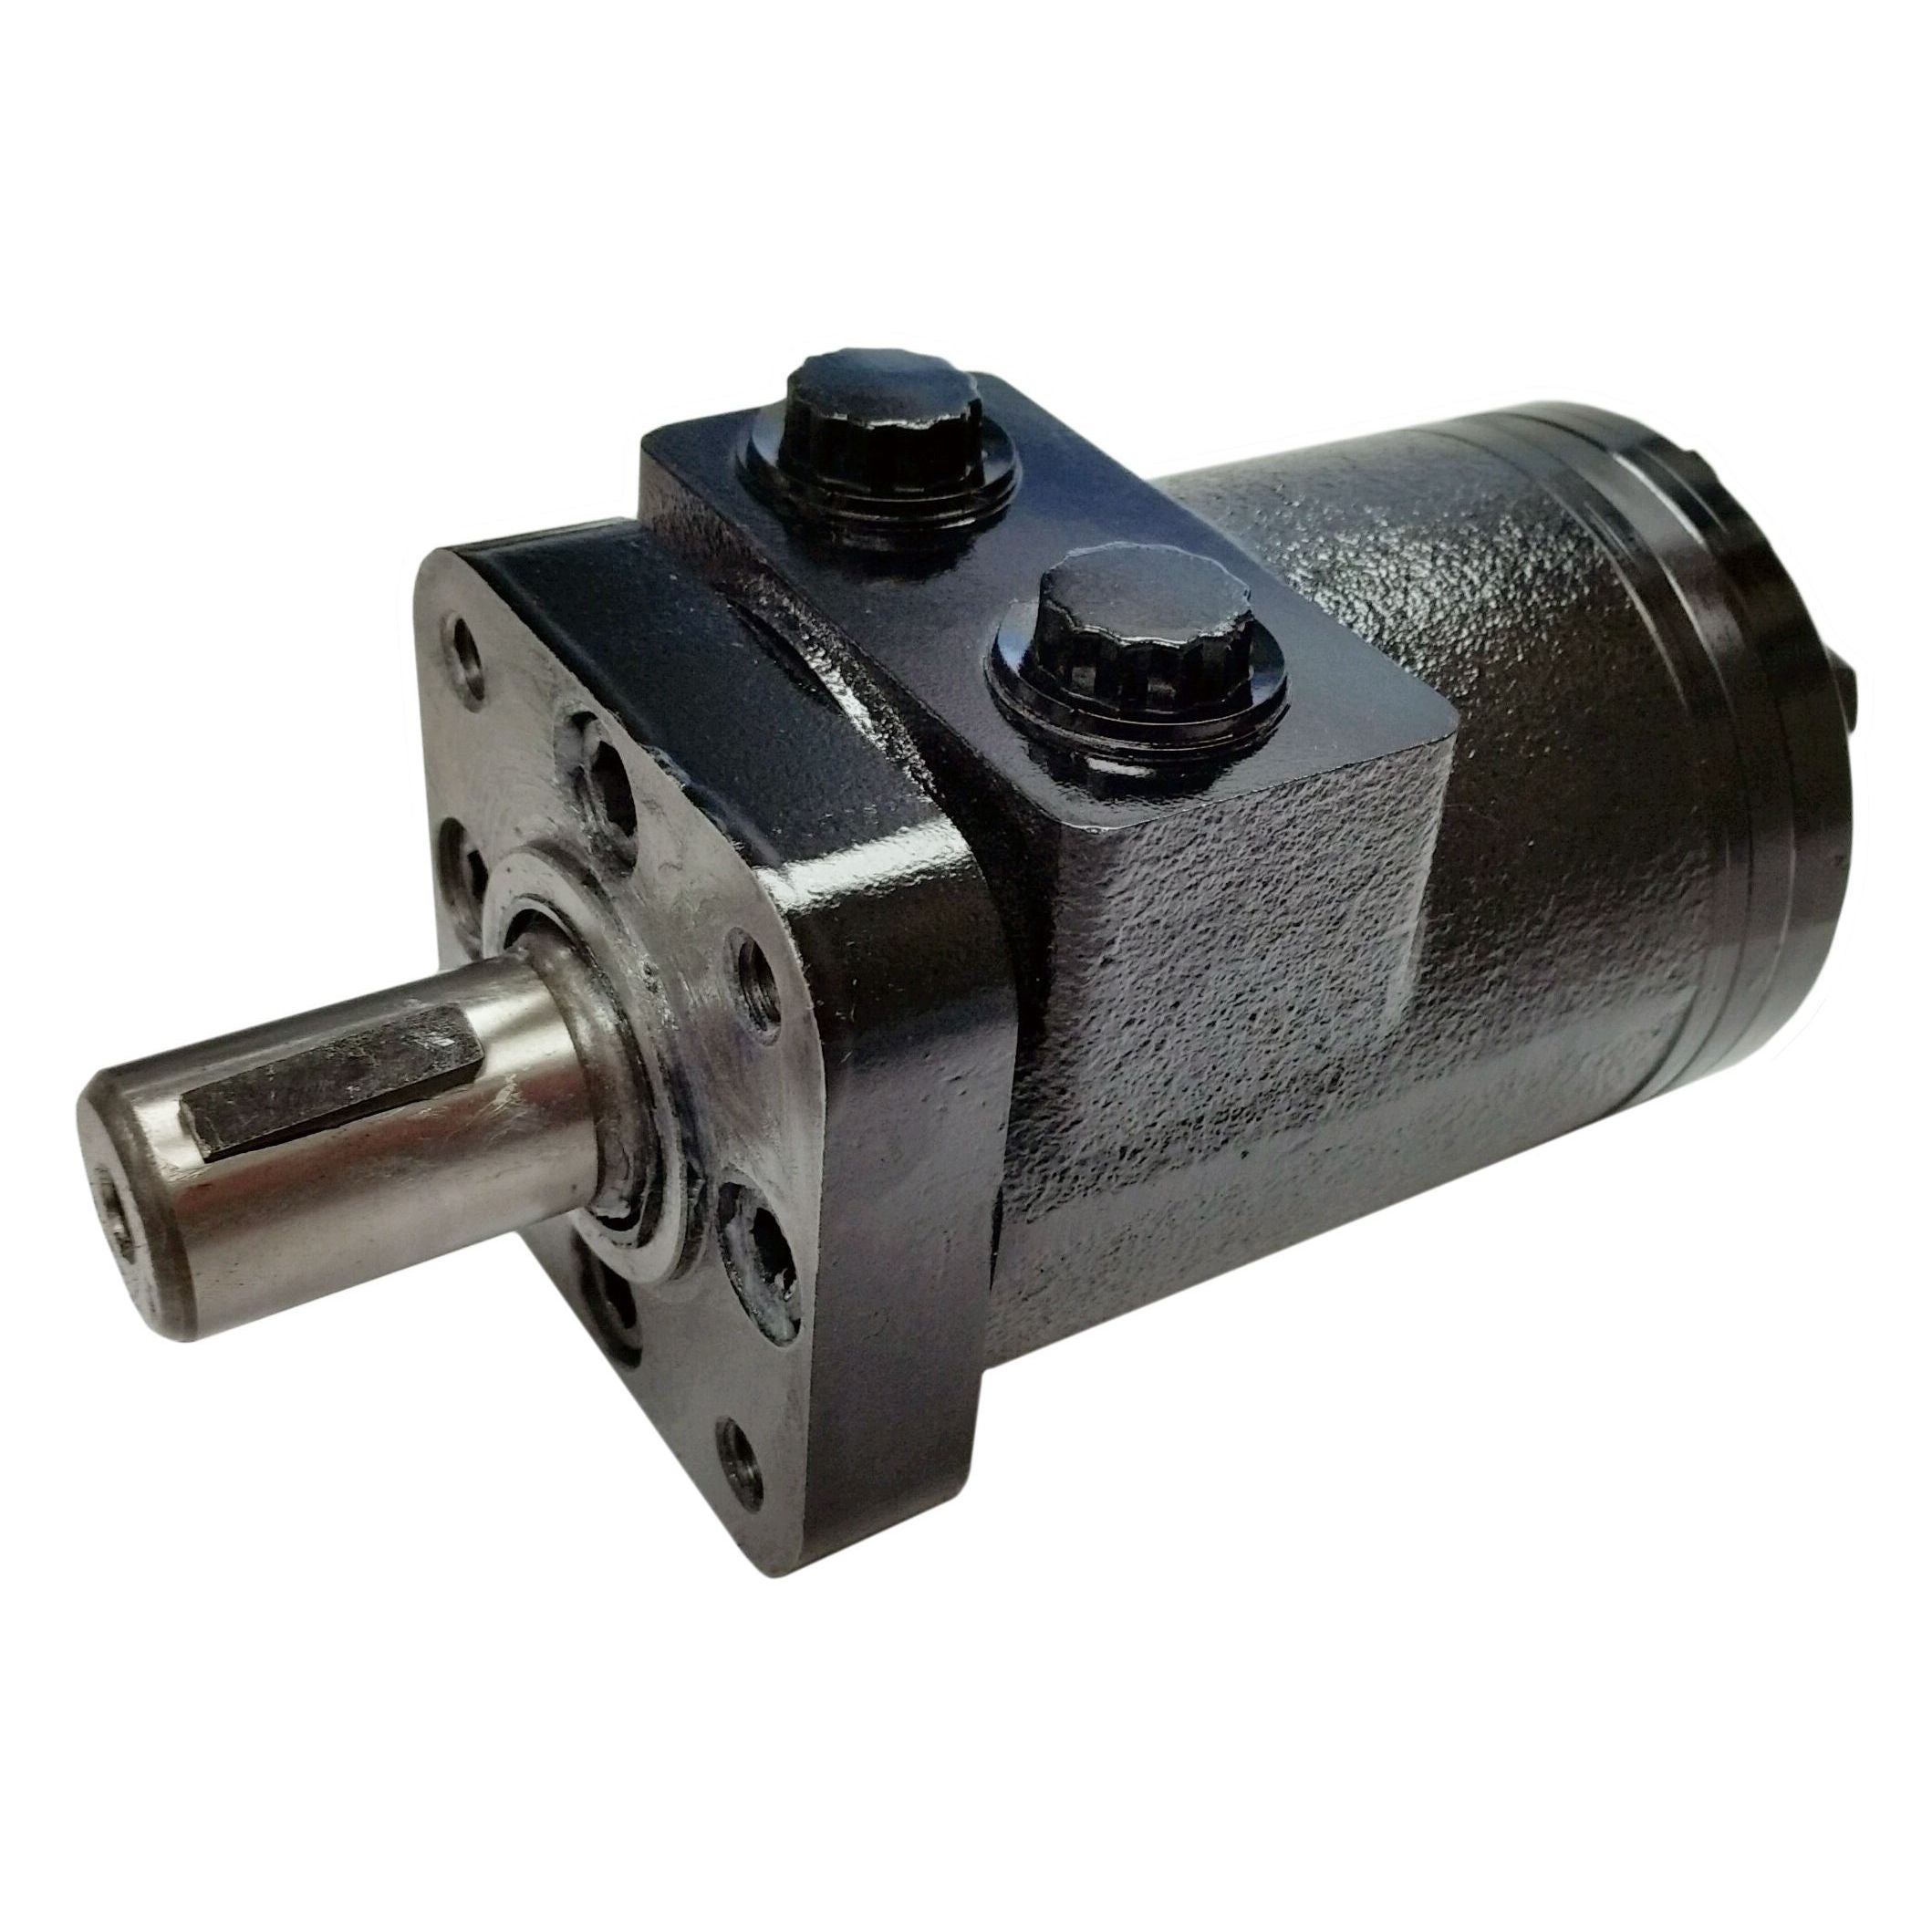 BMPH-36-H4-S-F : Dynamic LSHT Motor, 36cc, 1500RPM, 487in-lb, 1813psi Differential, 14.53GPM, SAE A 4-Bolt Mount, 6-Tooth Shaft, Side Ported, Manifold